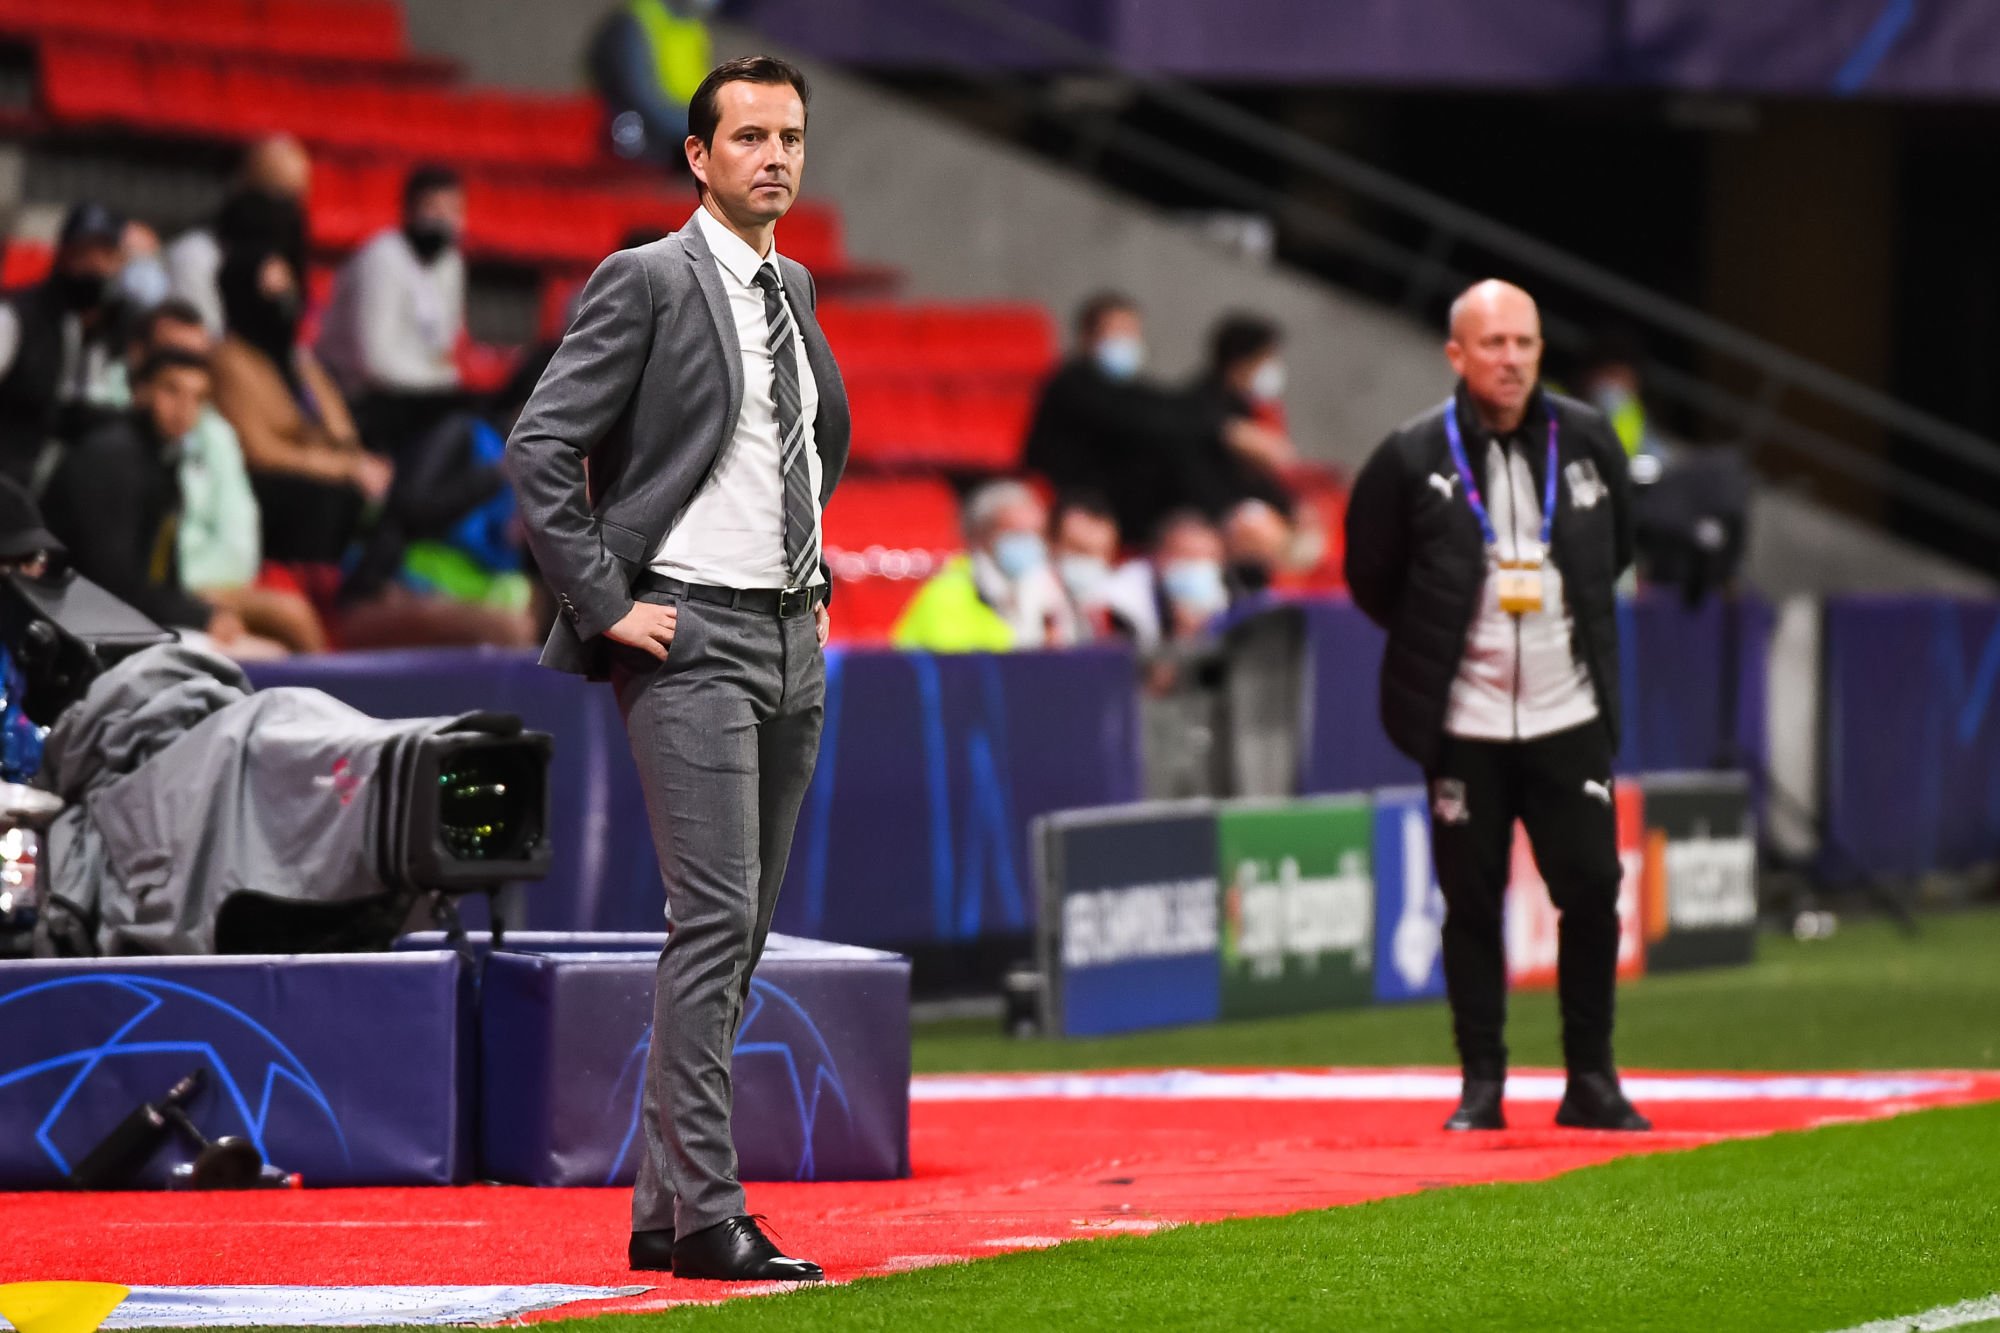 Julien STEPHAN head coach of Rennes during the UEFA Champions League soccer match between Rennes and Krasnodar at Roazhon Park on October 20, 2020 in Rennes, France. (Photo by Baptiste Fernandez/Icon Sport) - Julien STEPHAN - Roazhon Park - Rennes (France)